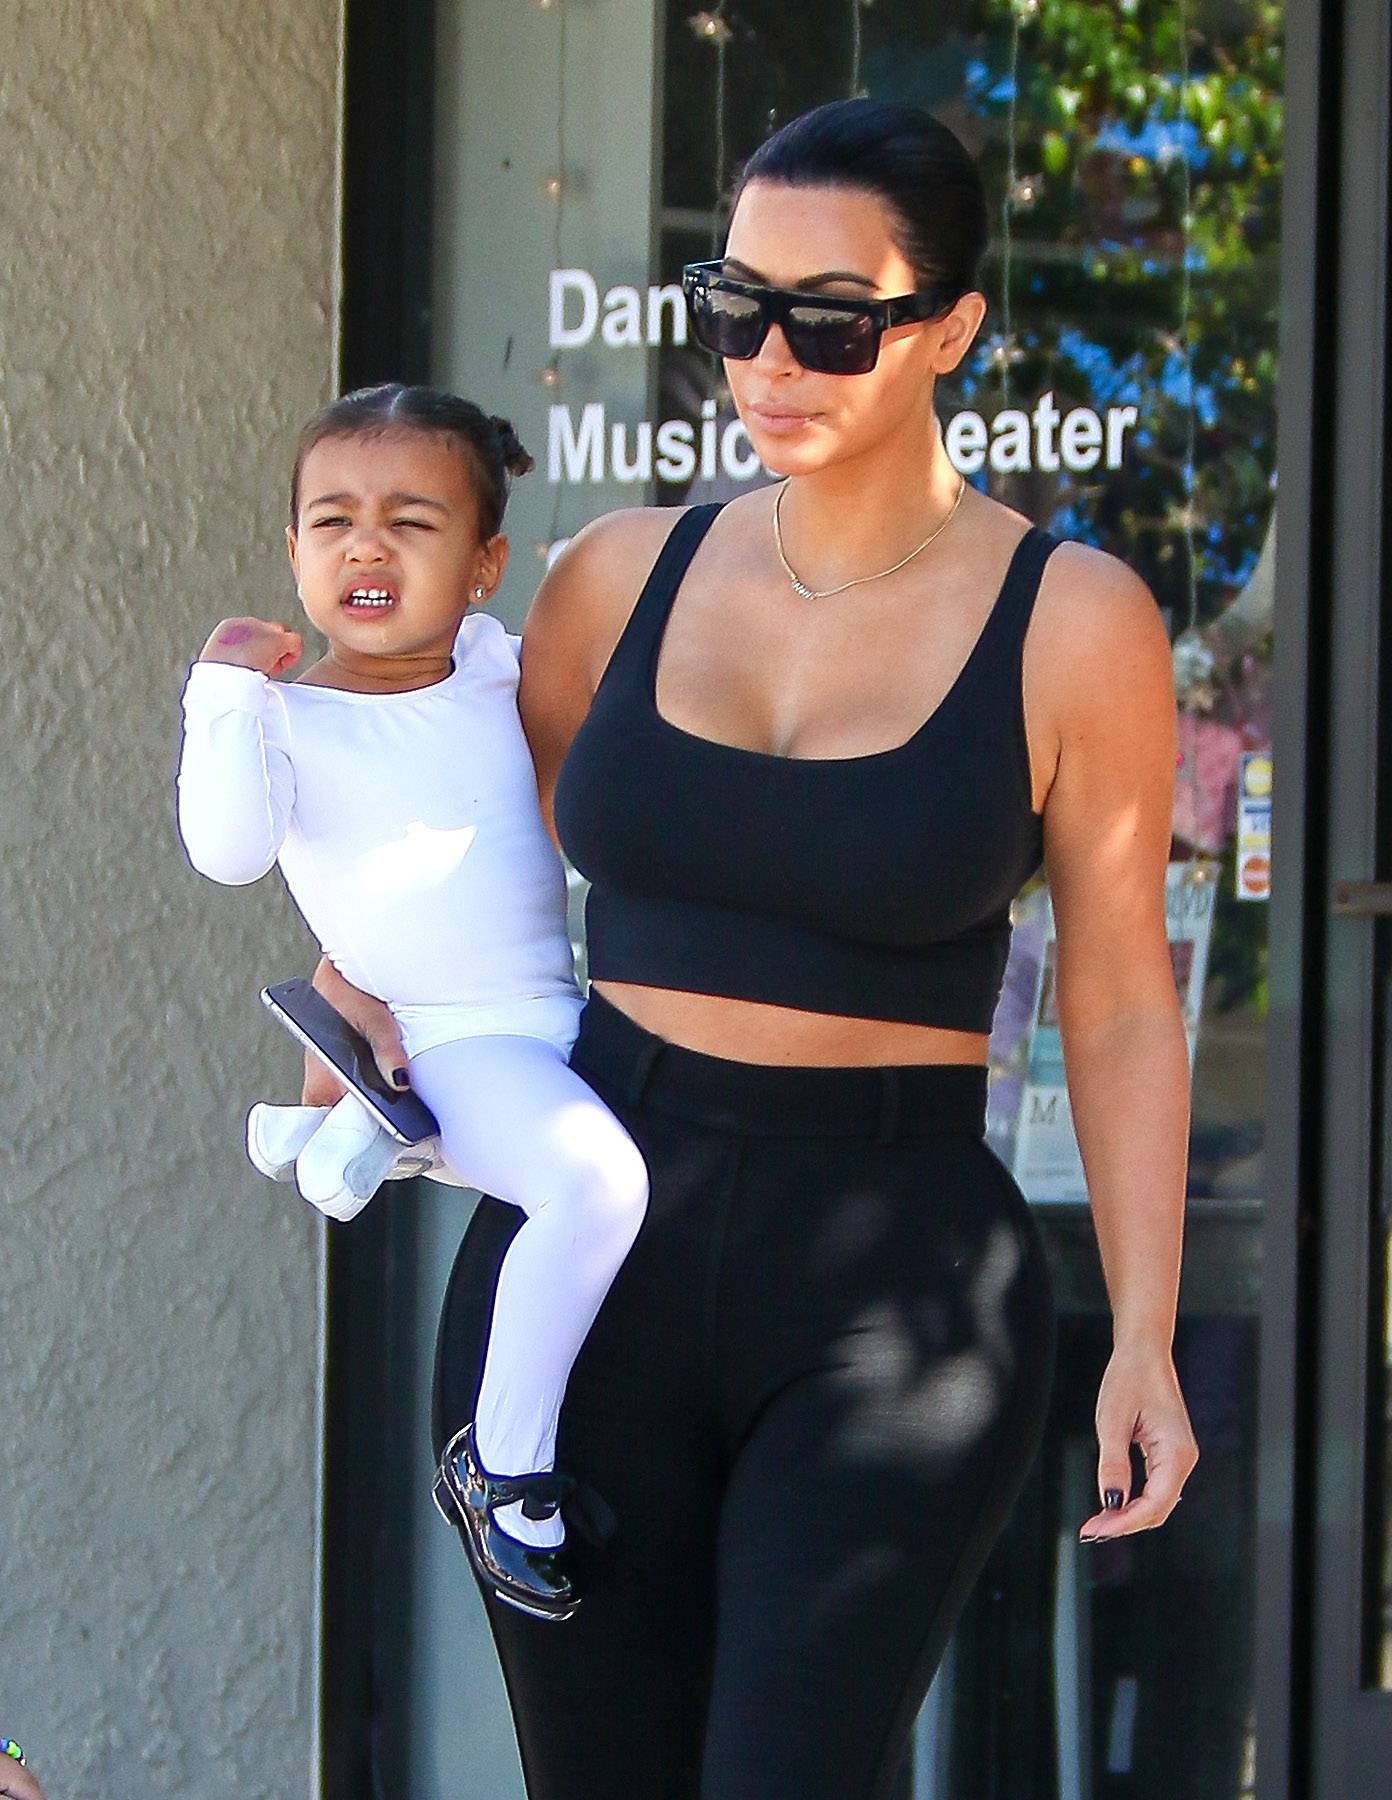 North West, the Ballerina&nbsp; - Kim Kardashian was spotted with North West dressed in ballet gear leaving a dance studio. Aaaaw, those Kardashian-Wests are starting early with honing their little one's talent.&nbsp;   (Photo: WENN.com)